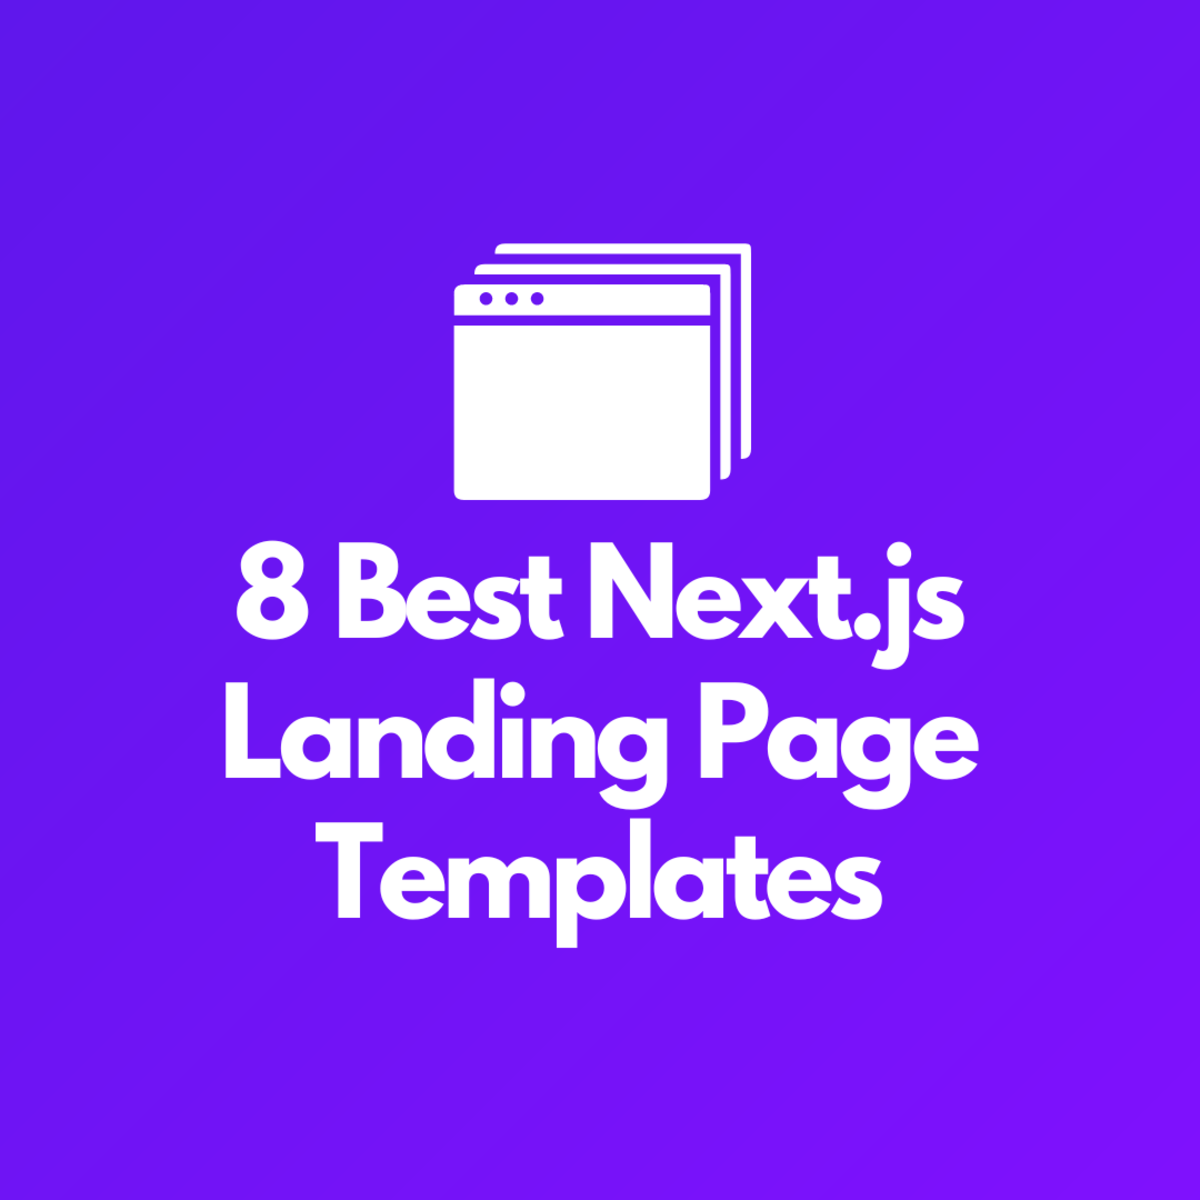 8 Best Next.js Landing Page Templates for Your Site The Ultimate List